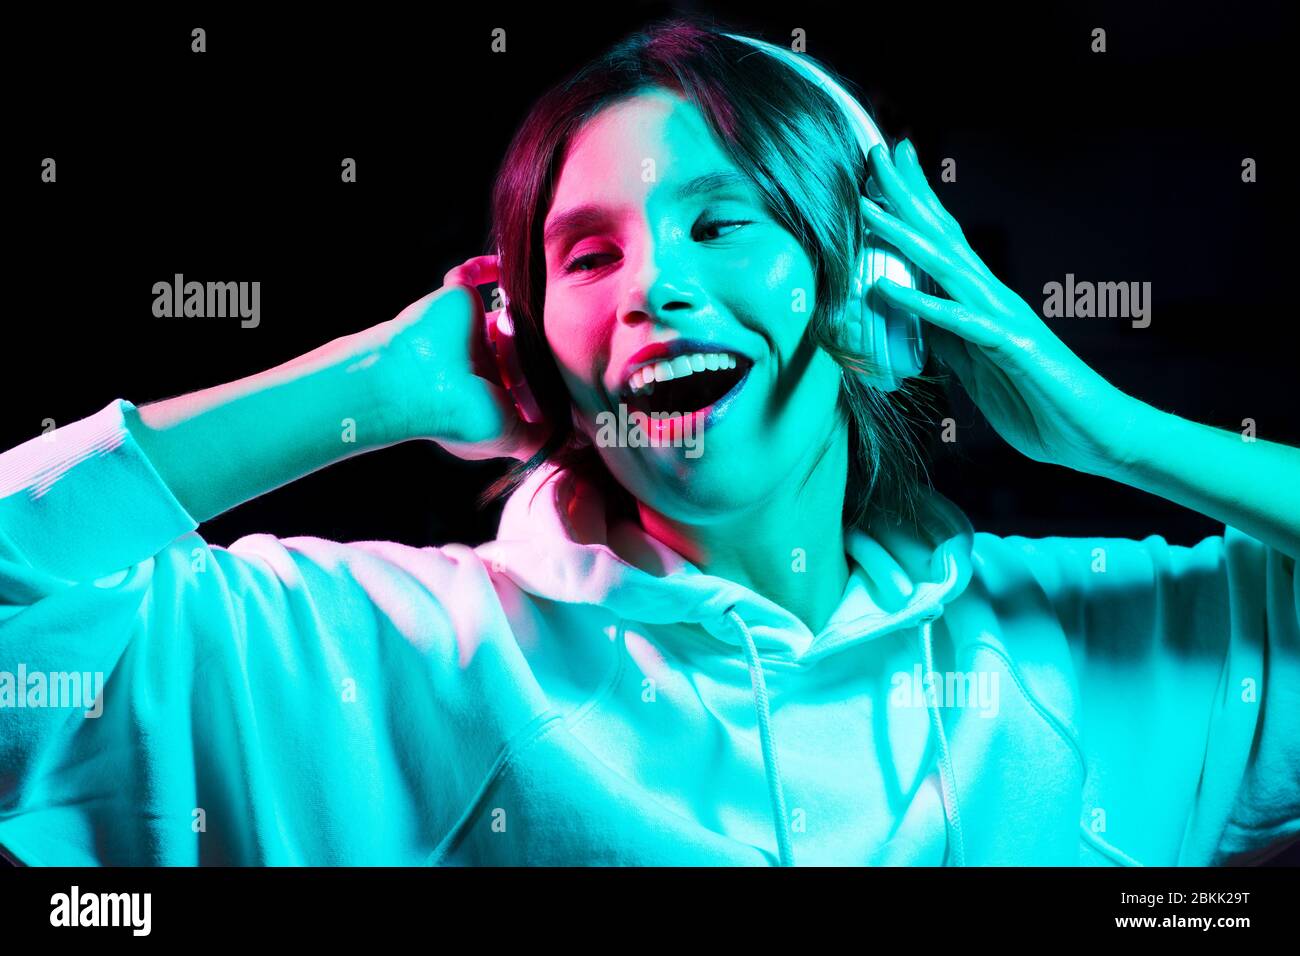 woman in headphones listening to music and dancing Stock Photo